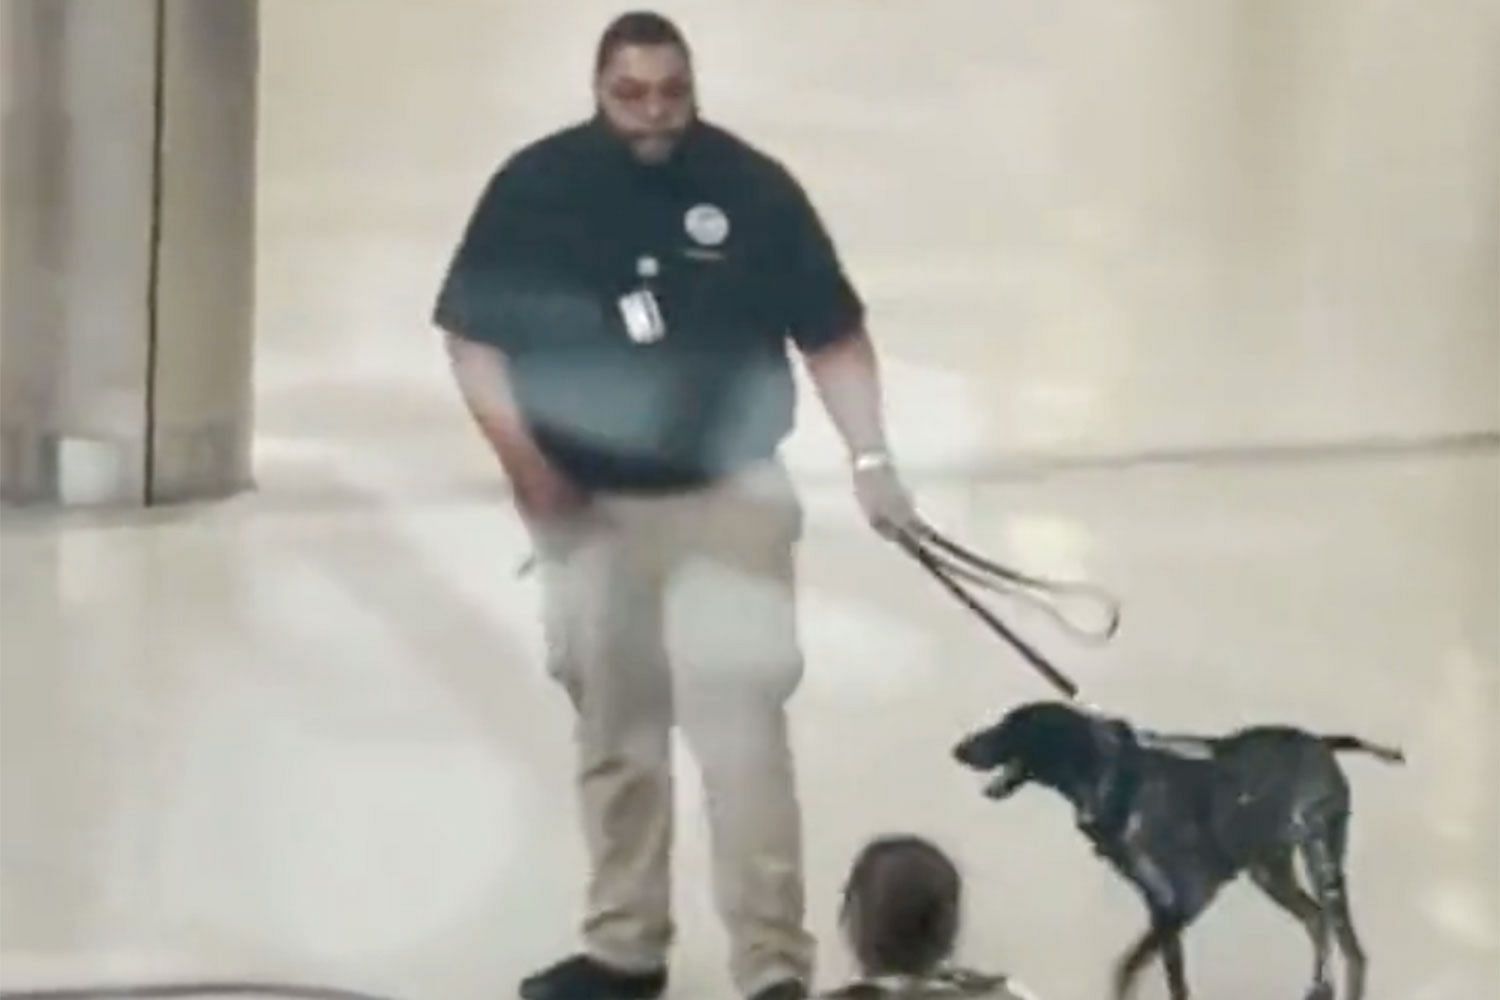 Social media users infuriated after a video of TSA handler aggressively pulling the dog emerges on social media. (Image via @Imposter_Edits/Twitter)